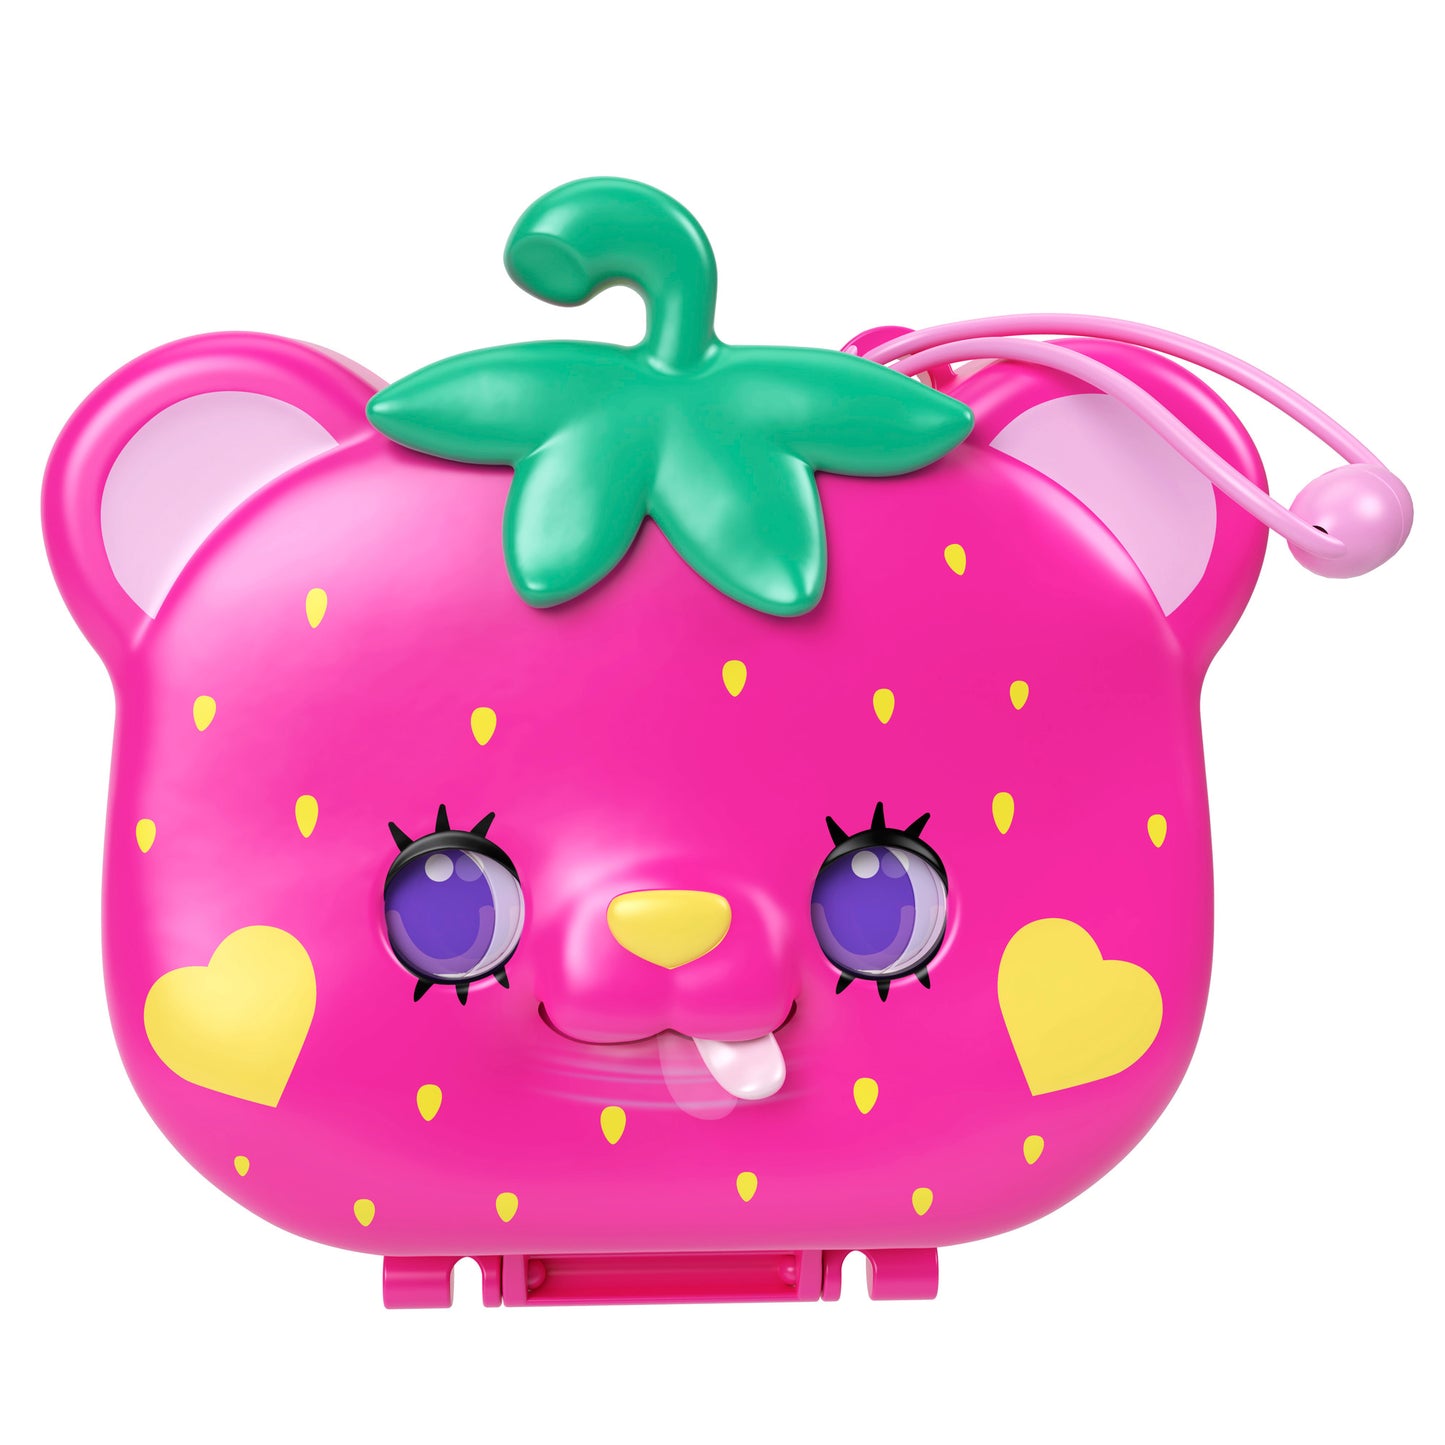 Polly Pocket Straw-beary Patch Compact